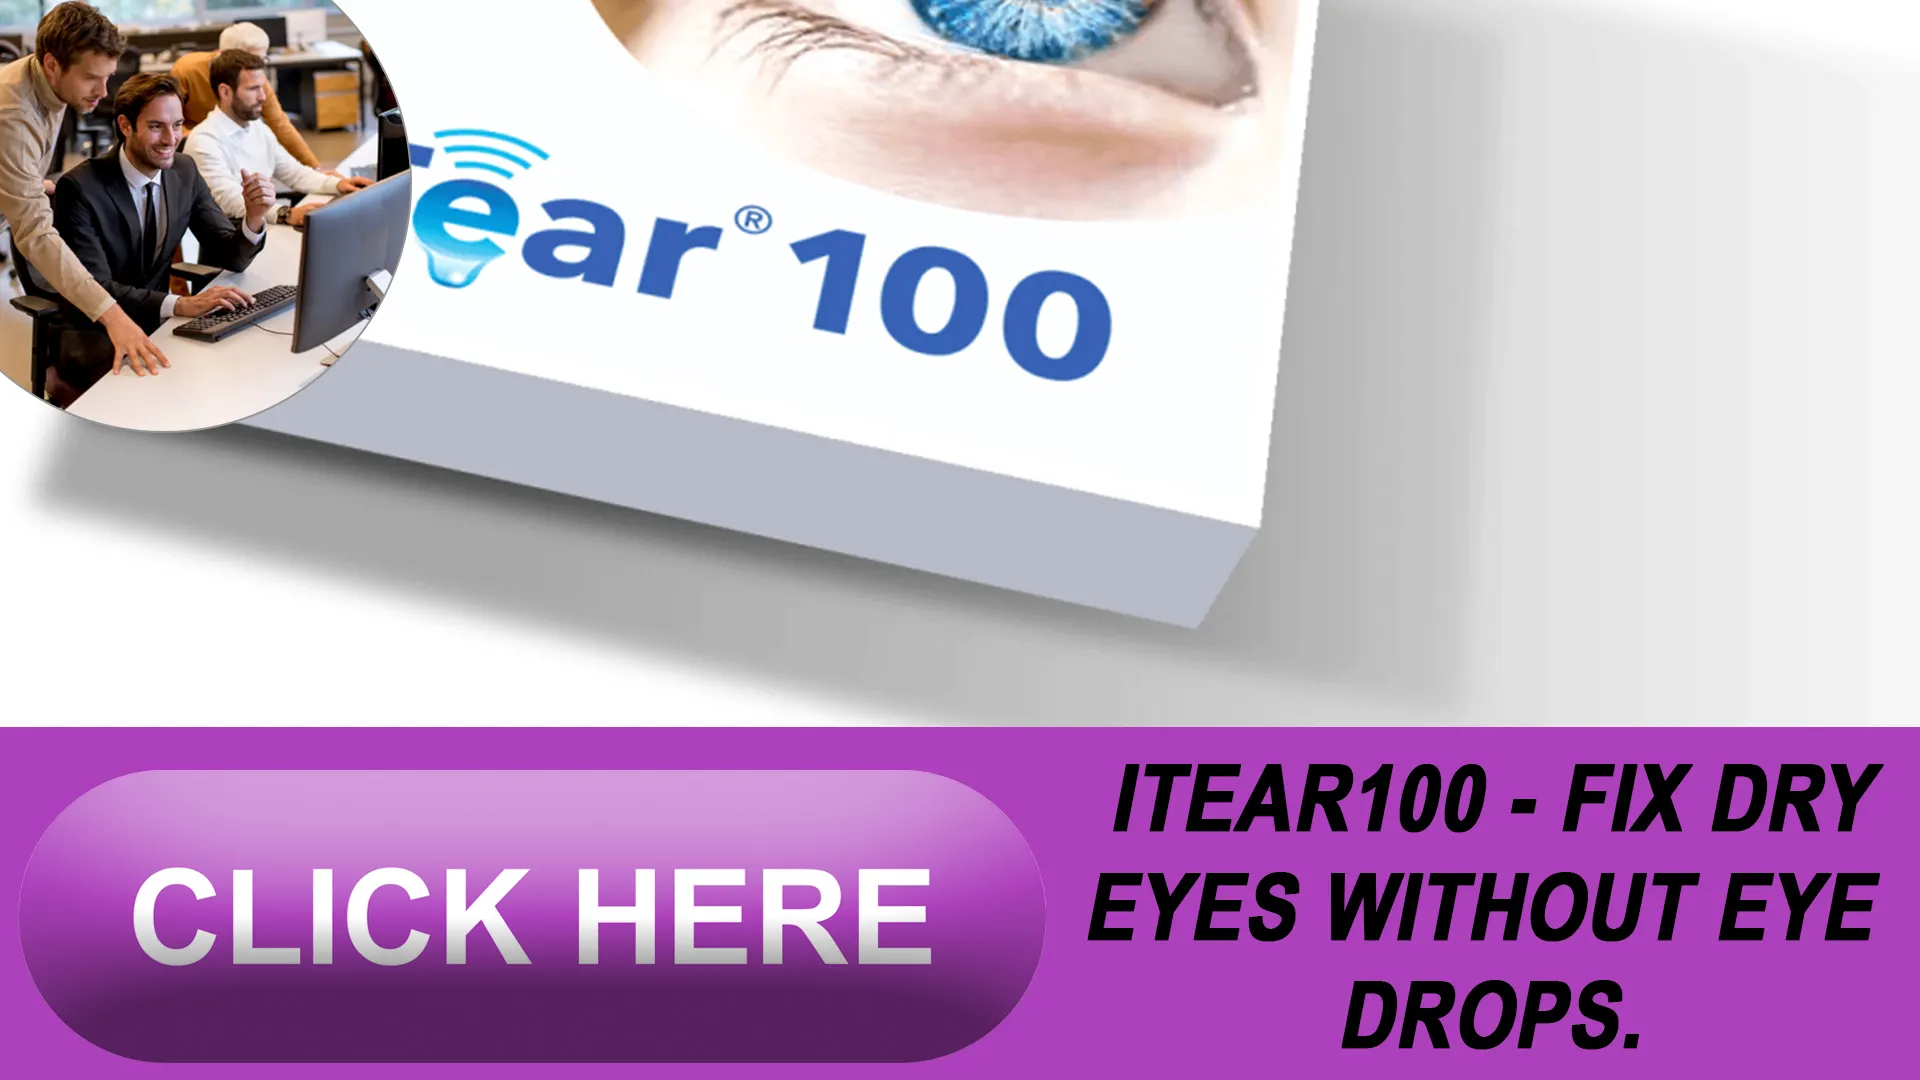 iTear100: A Quick Overview